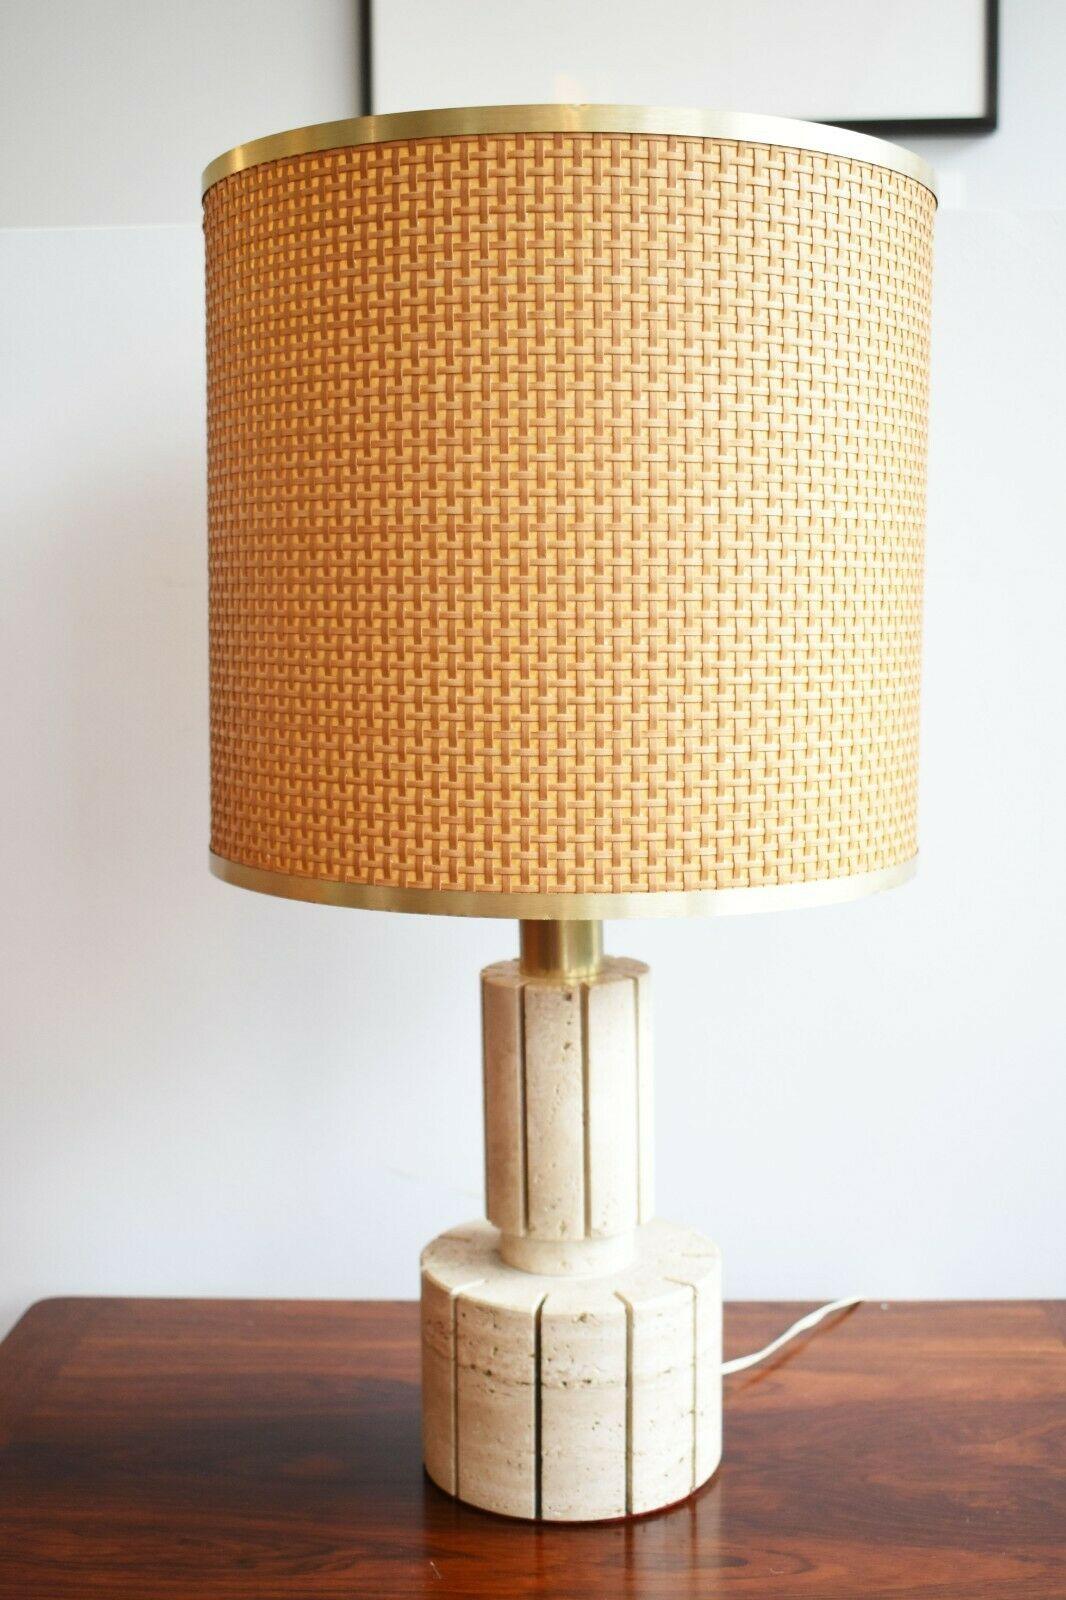 An Italian 1970's mid 20th century modern desk / table lamp featuring a woven cylindrical bamboo shade with an elegant brass taped top and bottom. 

The lamp has a cylindrical travertine base, detailed with deep vertical grooves, connecting to